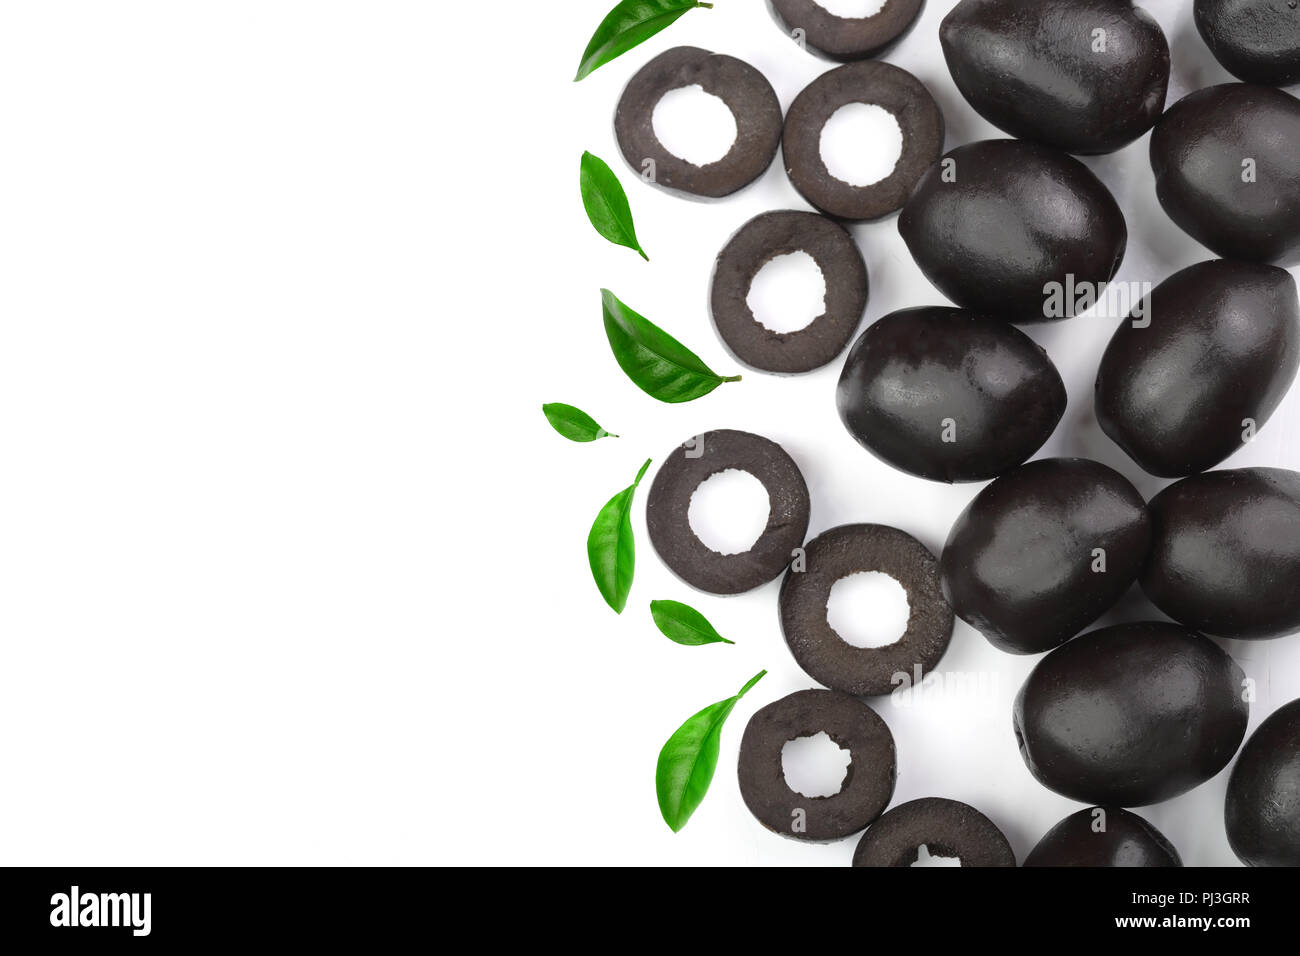 whole and sliced black olives decorated with leaves isolated on white background with copy space for your text. Top view Stock Photo